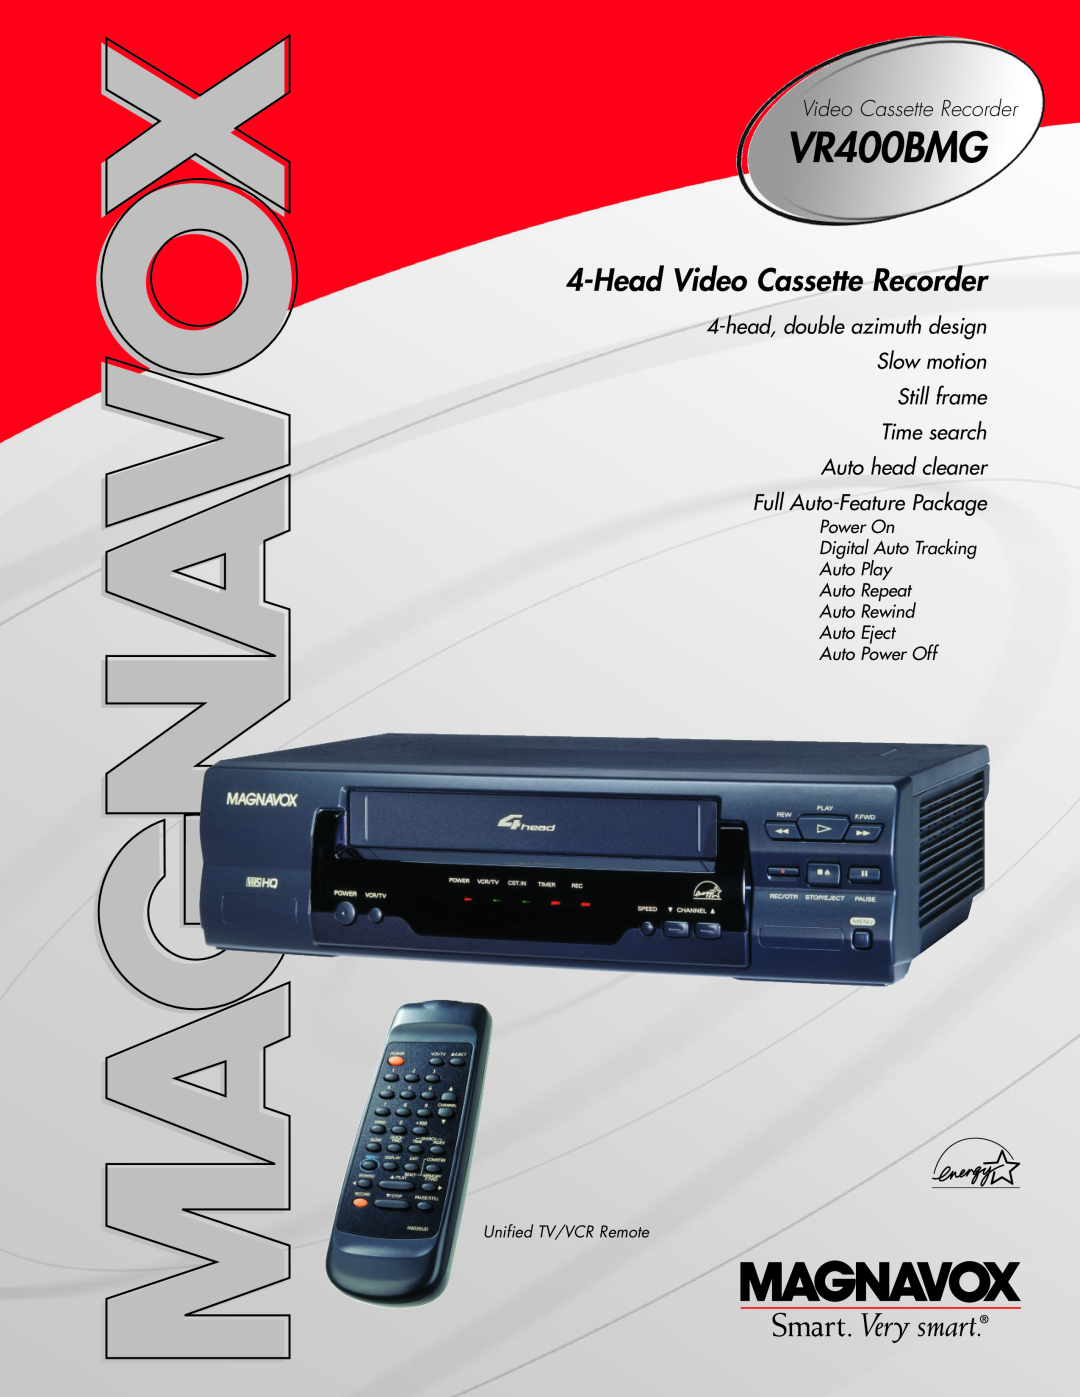 Magnavox VR400BMG manual Power On Digital Auto Tracking Auto Play Auto Repeat Auto Rewind, Auto Eject Auto Power Off 